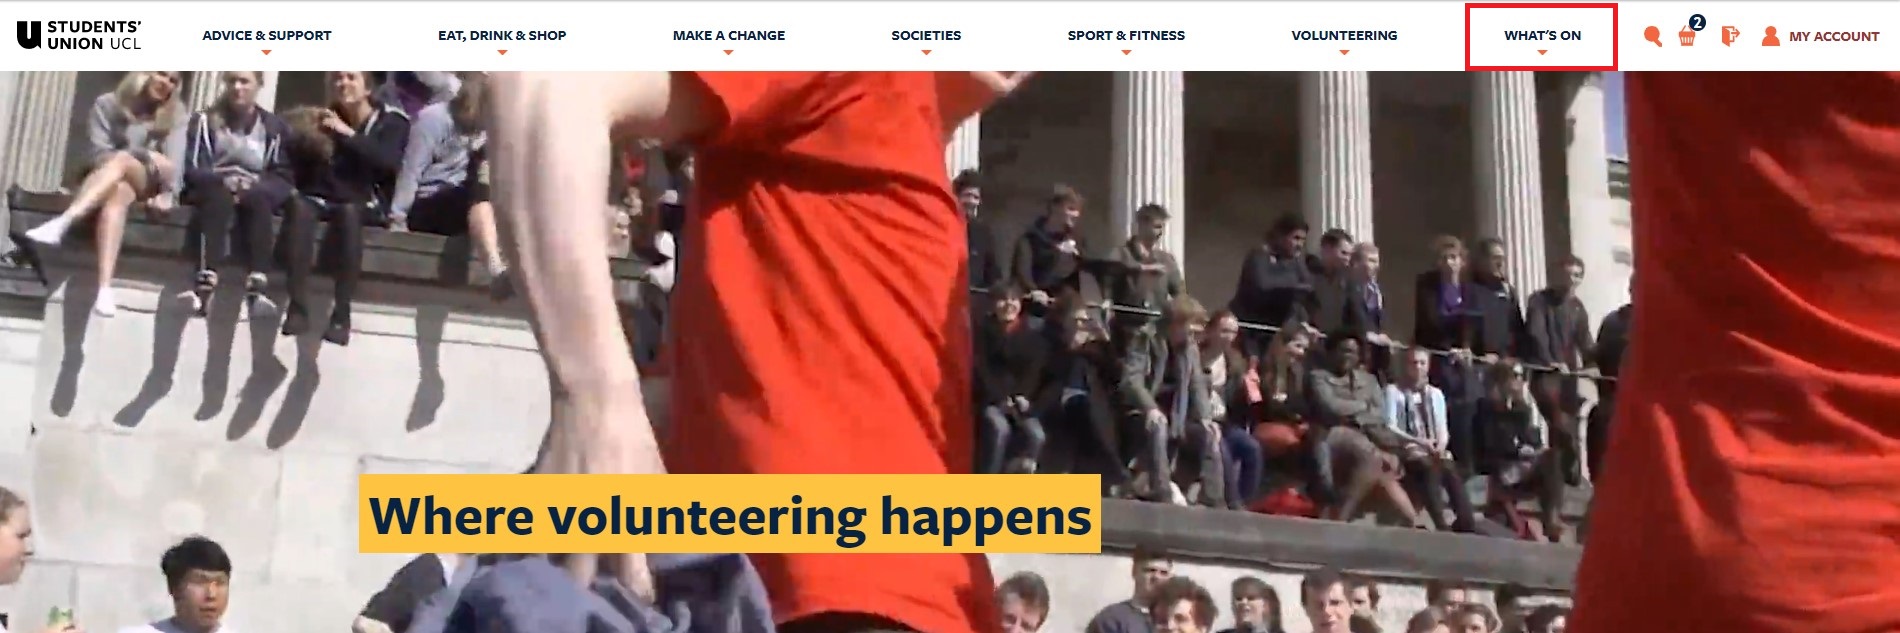 Home page of the SU Website